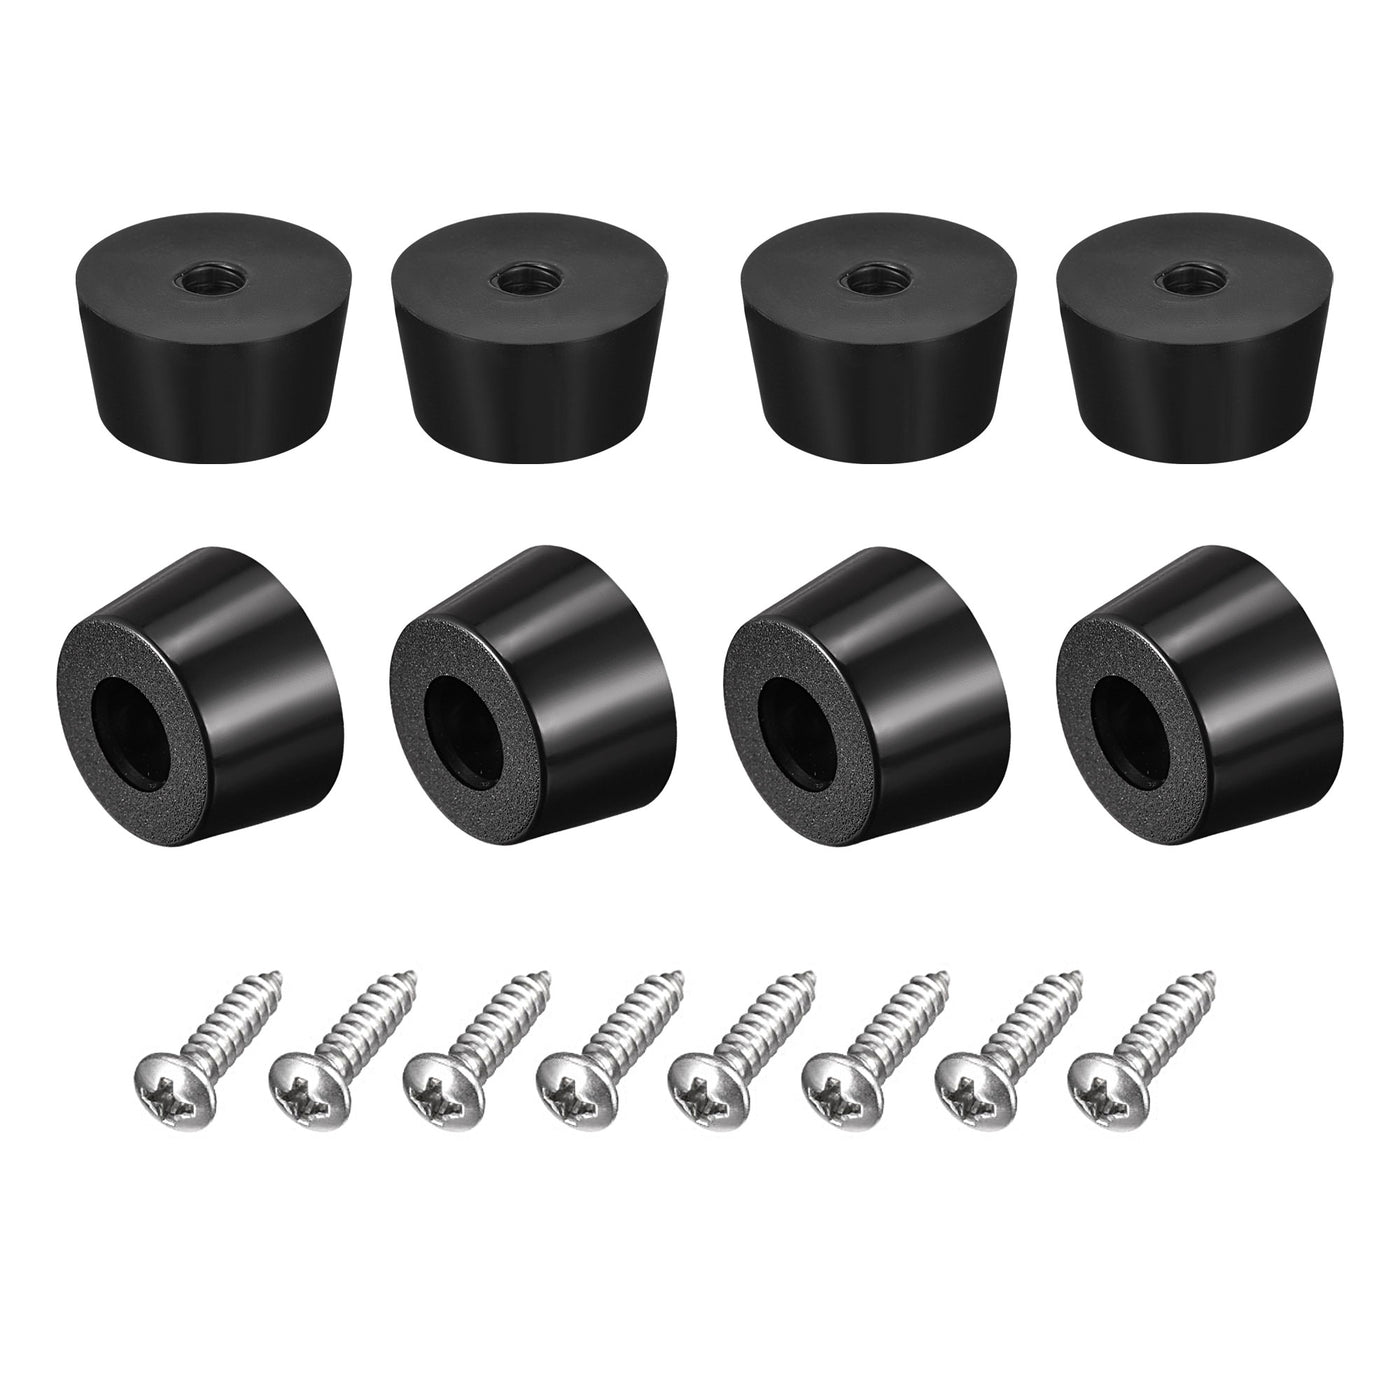 uxcell Uxcell 25mm W x 13mm H Round Rubber Bumper Feet, Stainless Steel Screws and Washer 8pcs